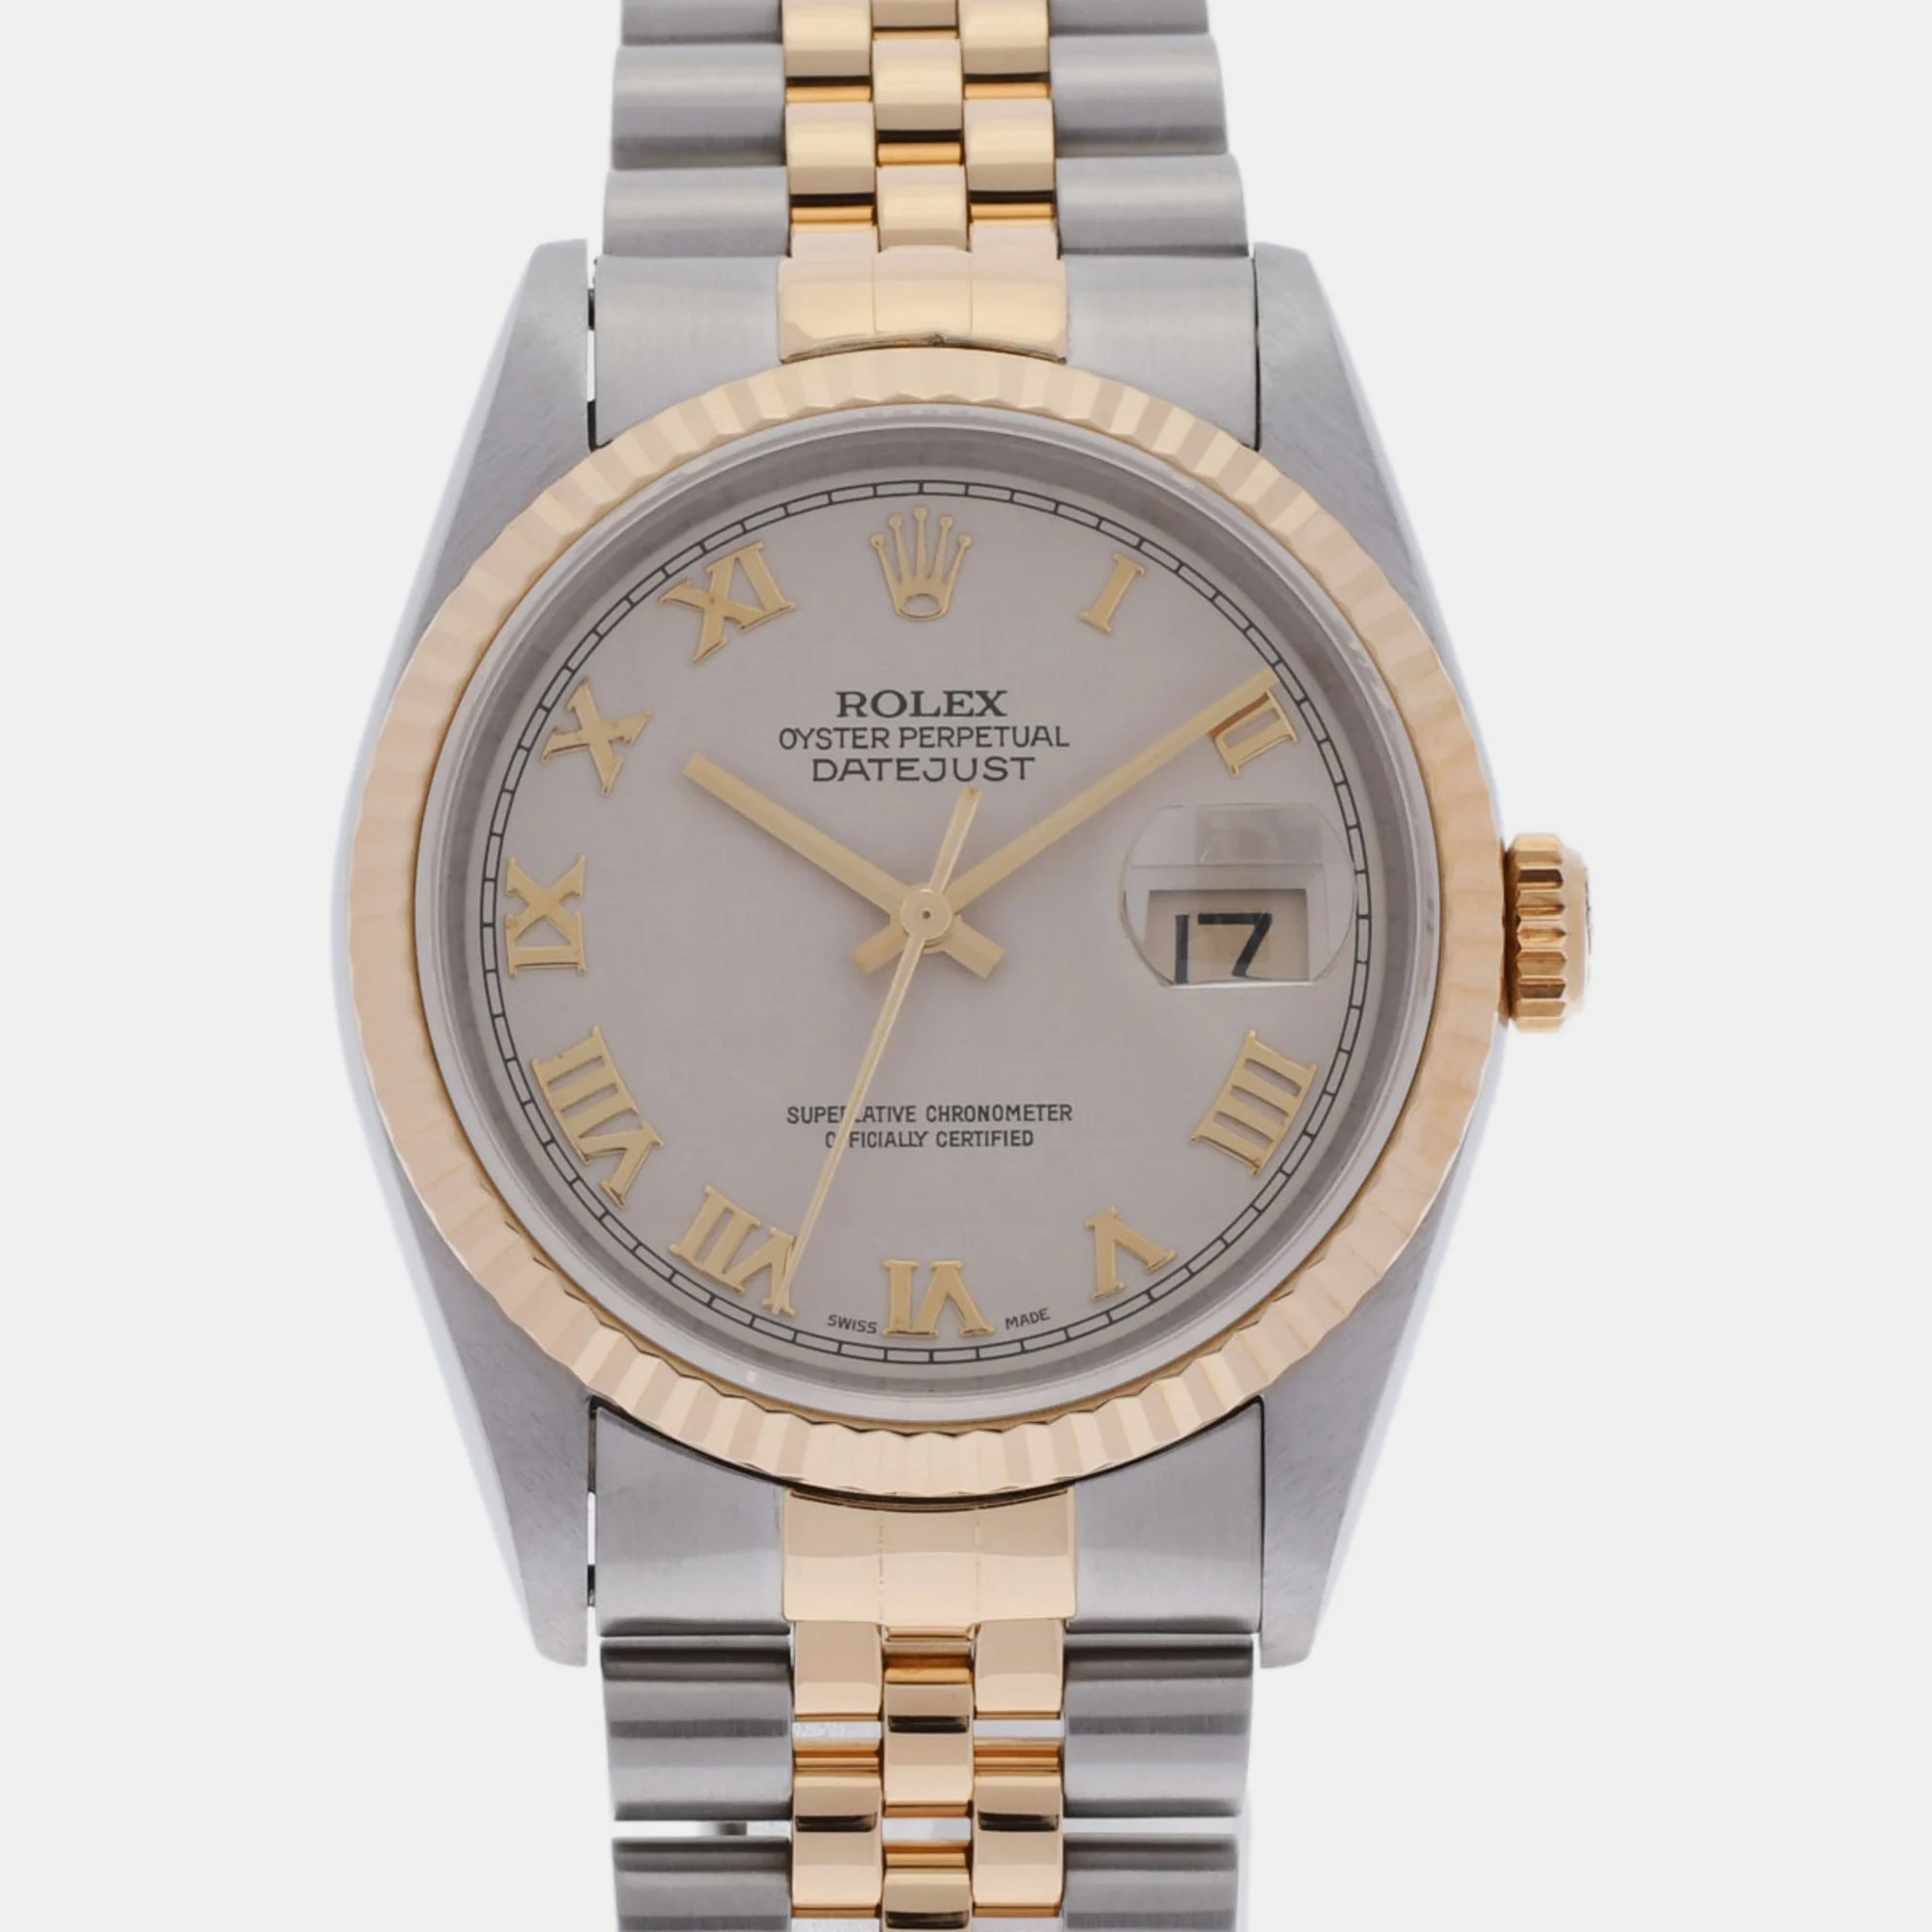 

Rolex Ivory 18k Yellow Gold Stainless Steel Datejust 16233 Automatic Men's Wristwatch 36 mm, White